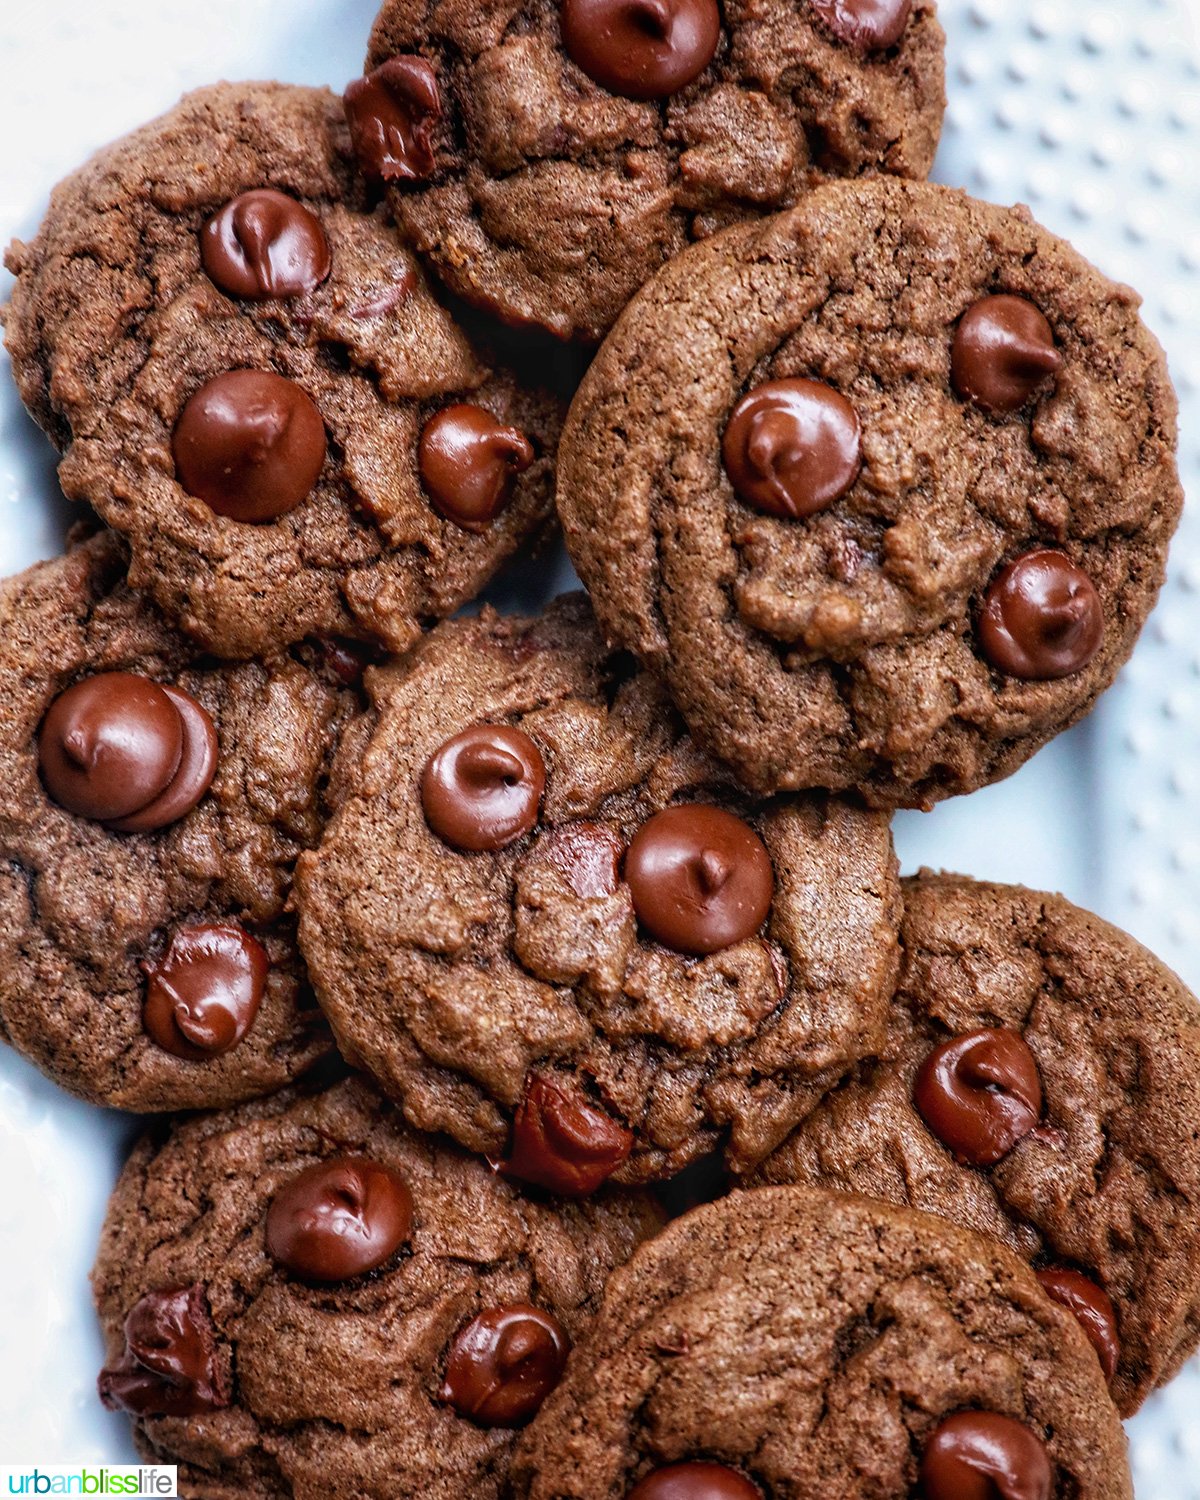 several double chocolate coffee cookies layered on a white plate.